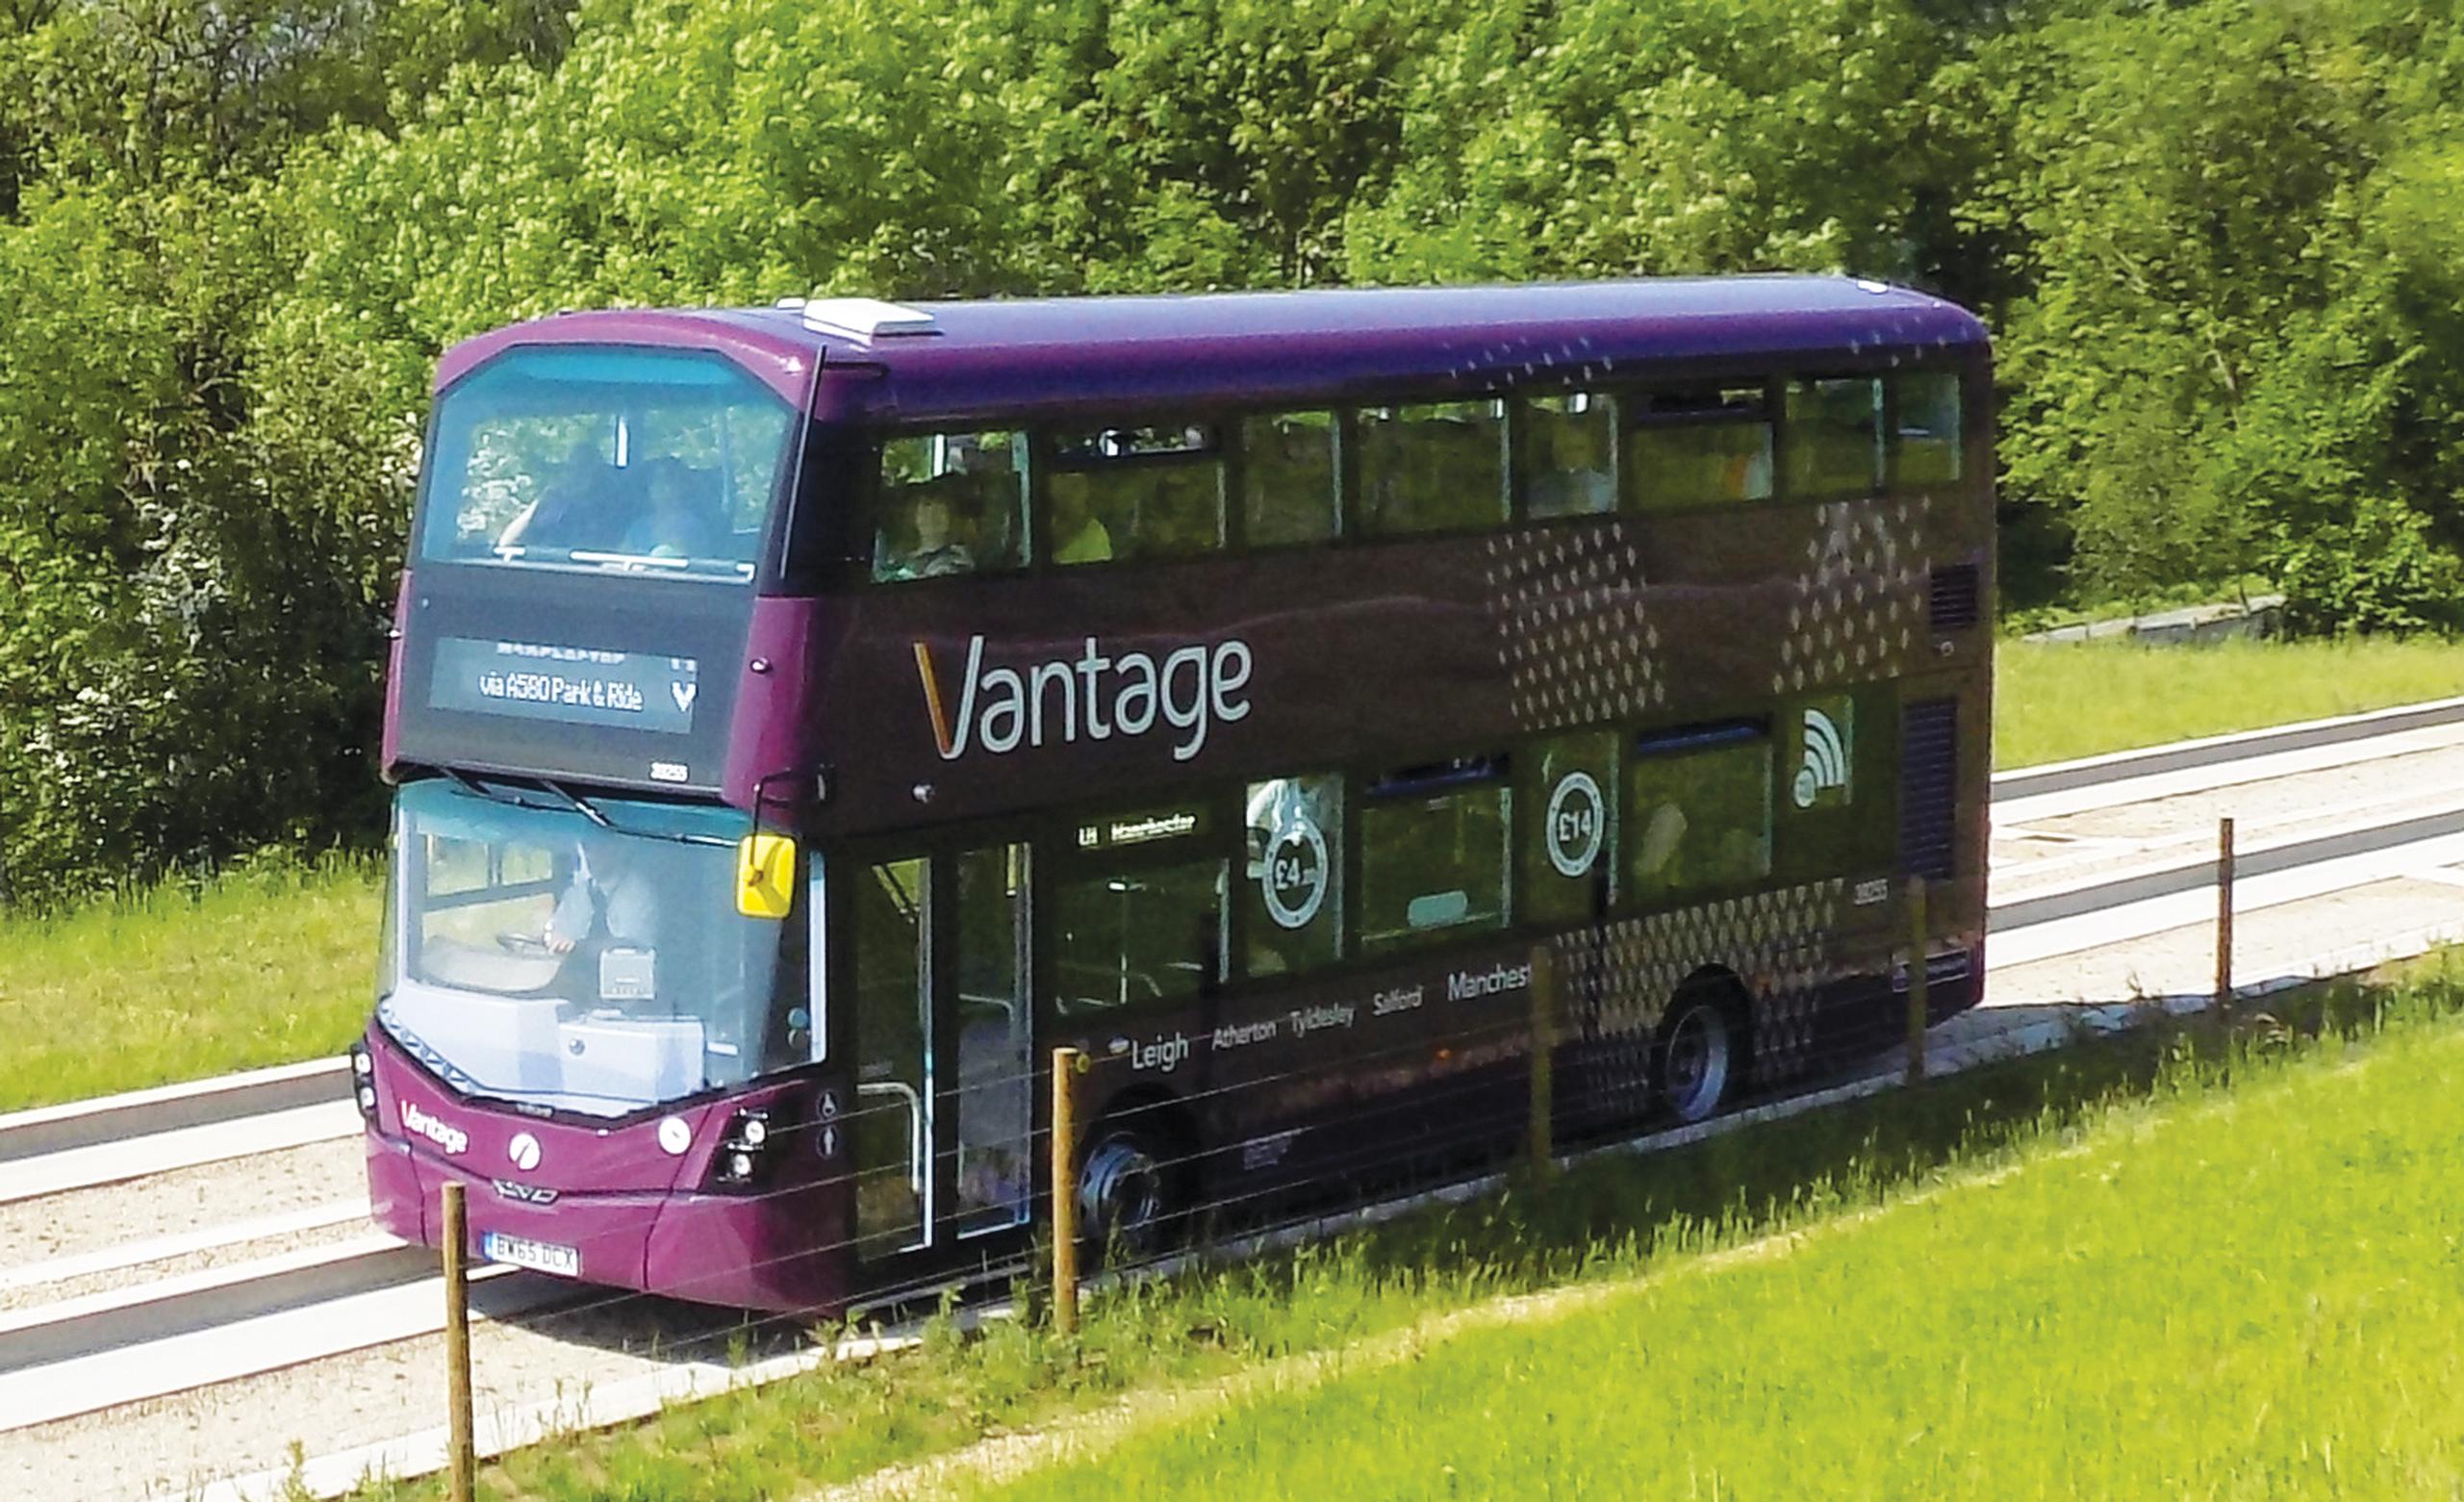 Vantage: some passenger satisfaction ratings are over 20% higher than the services it replaced